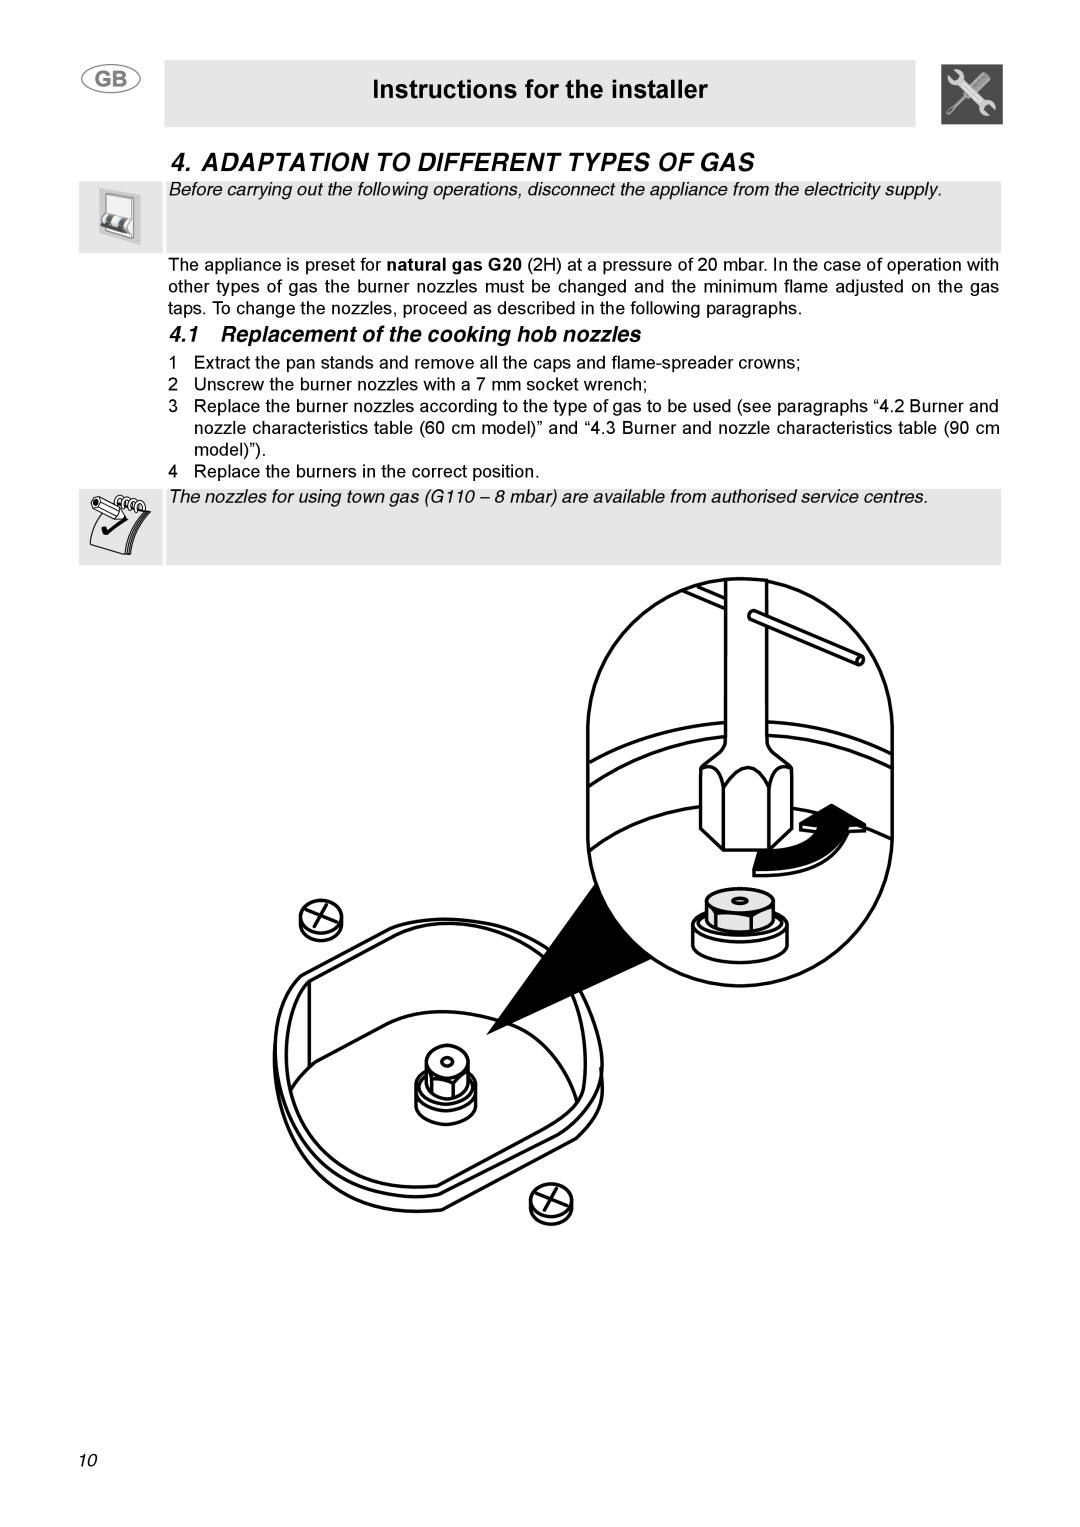 Smeg C9GGSSA Adaptation To Different Types Of Gas, Replacement of the cooking hob nozzles, Instructions for the installer 